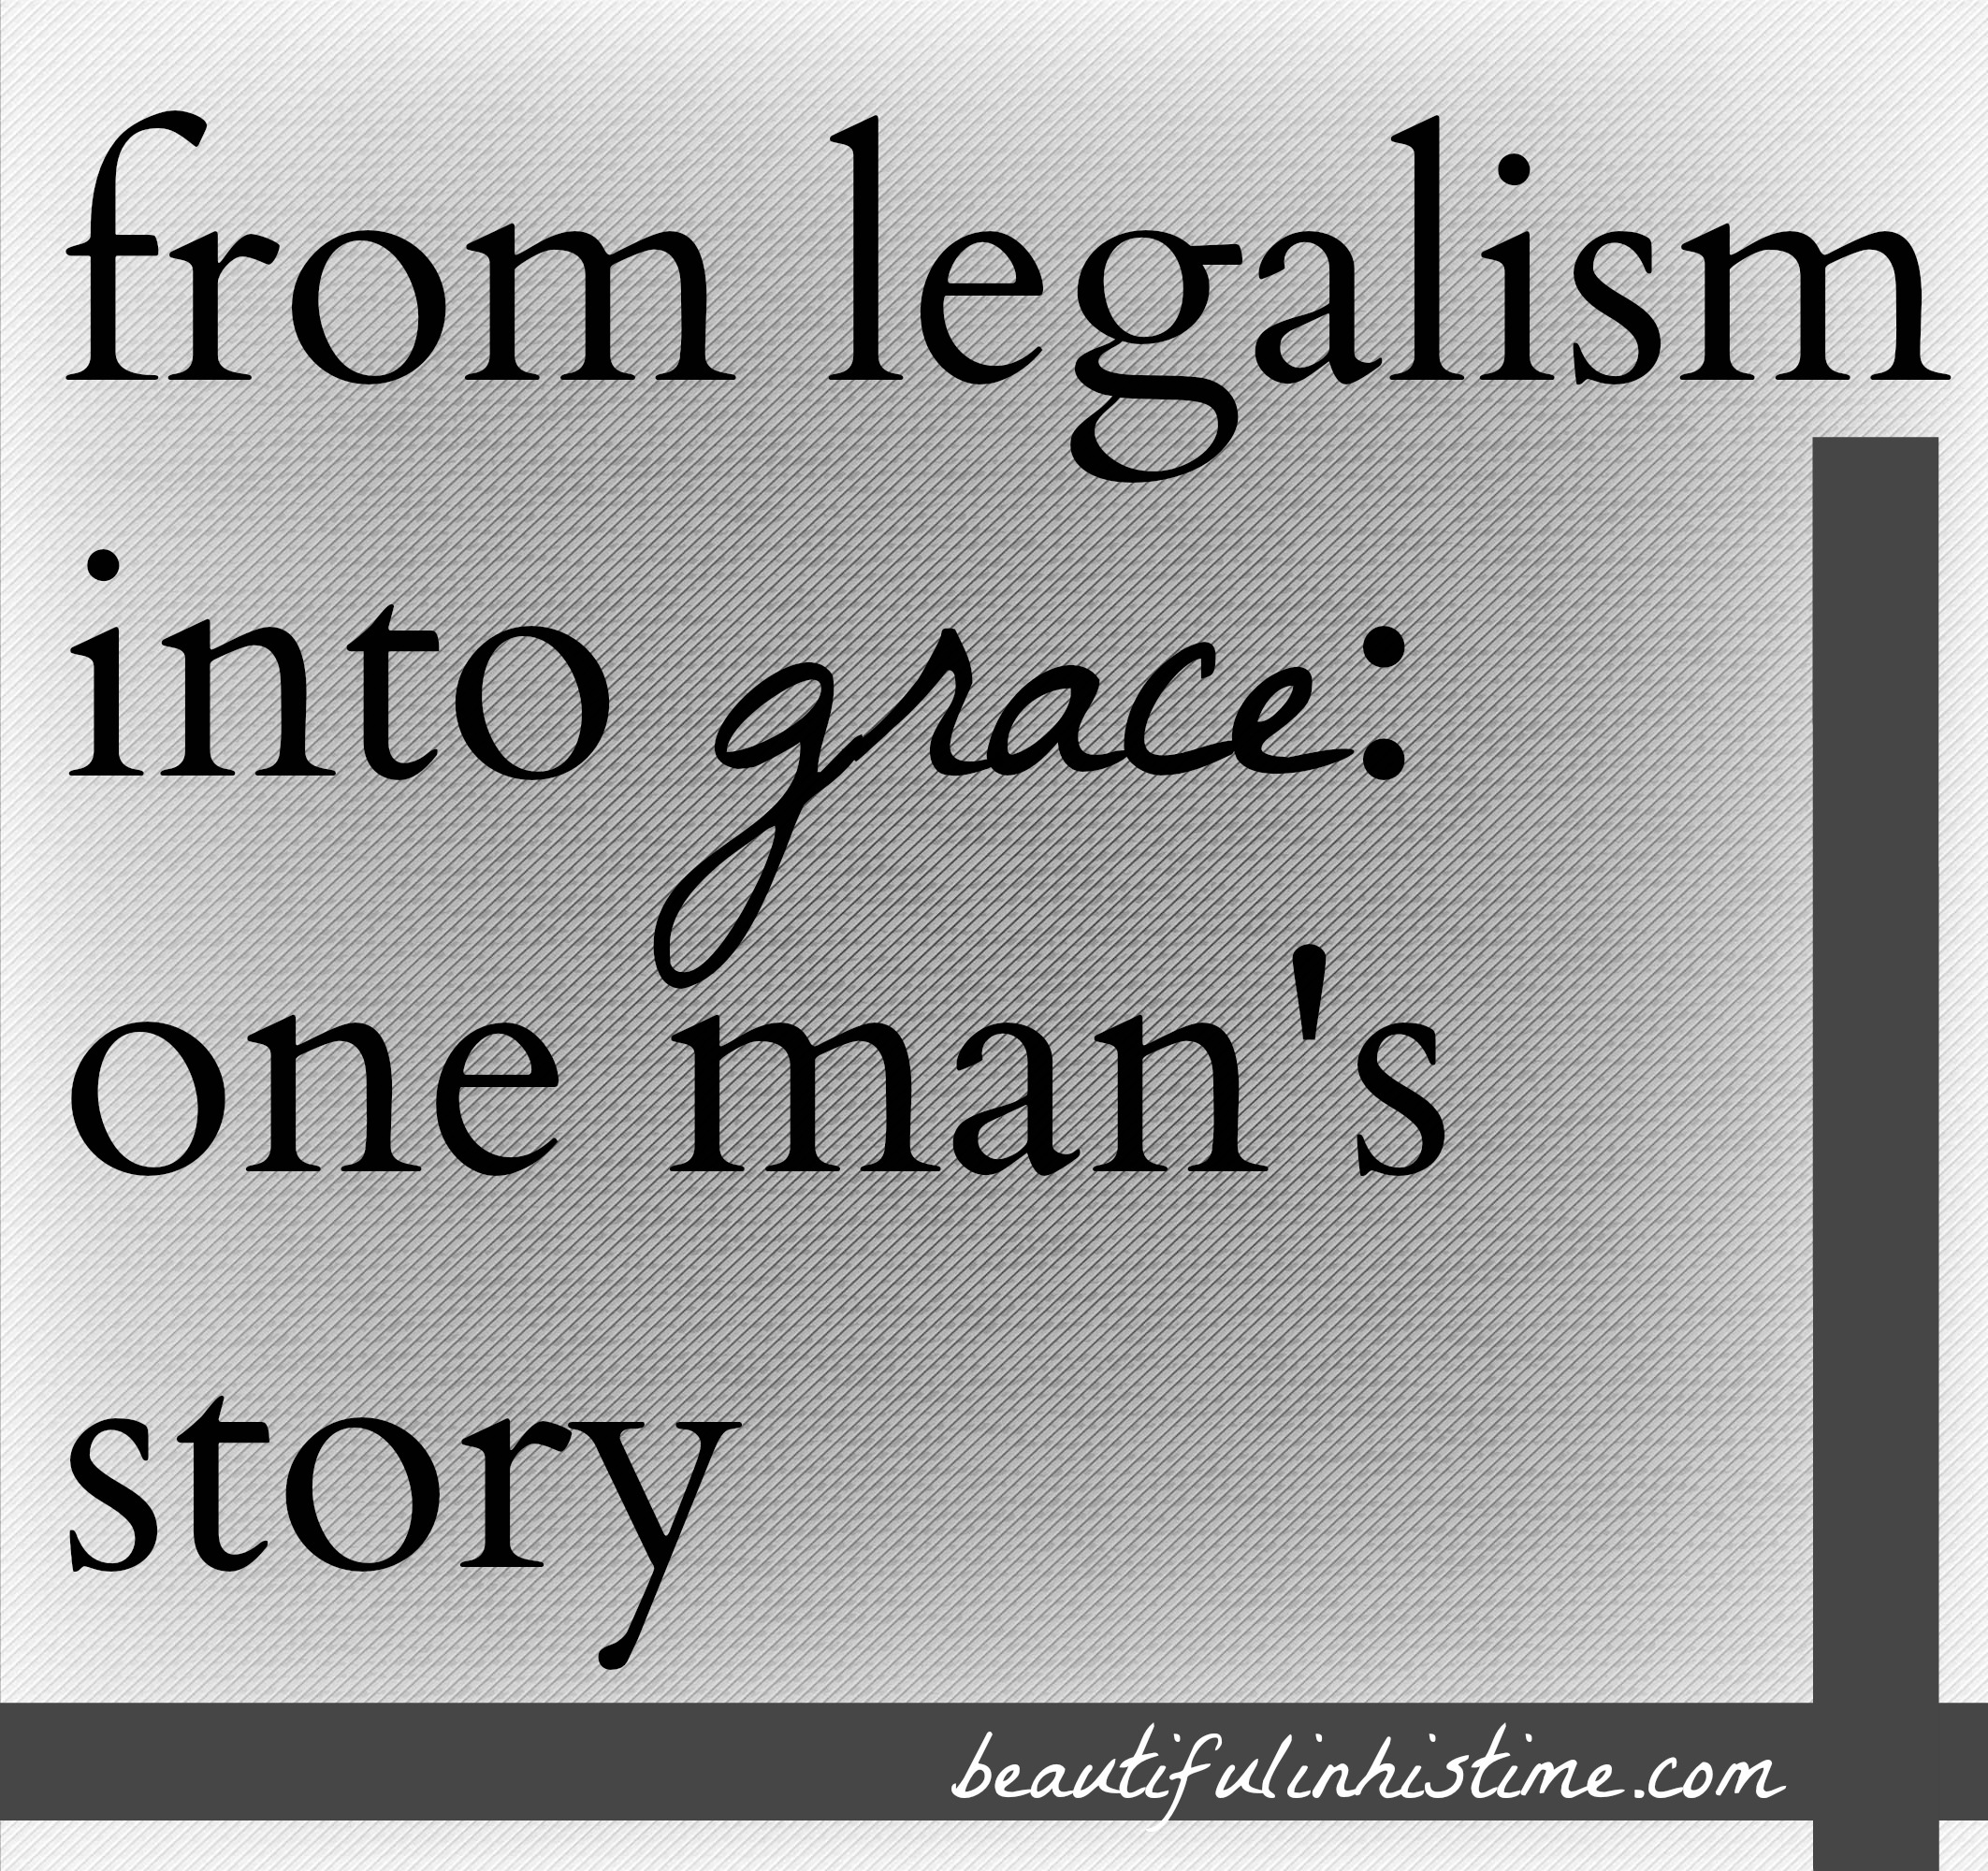 From legalism into grace: one man's life-changing story